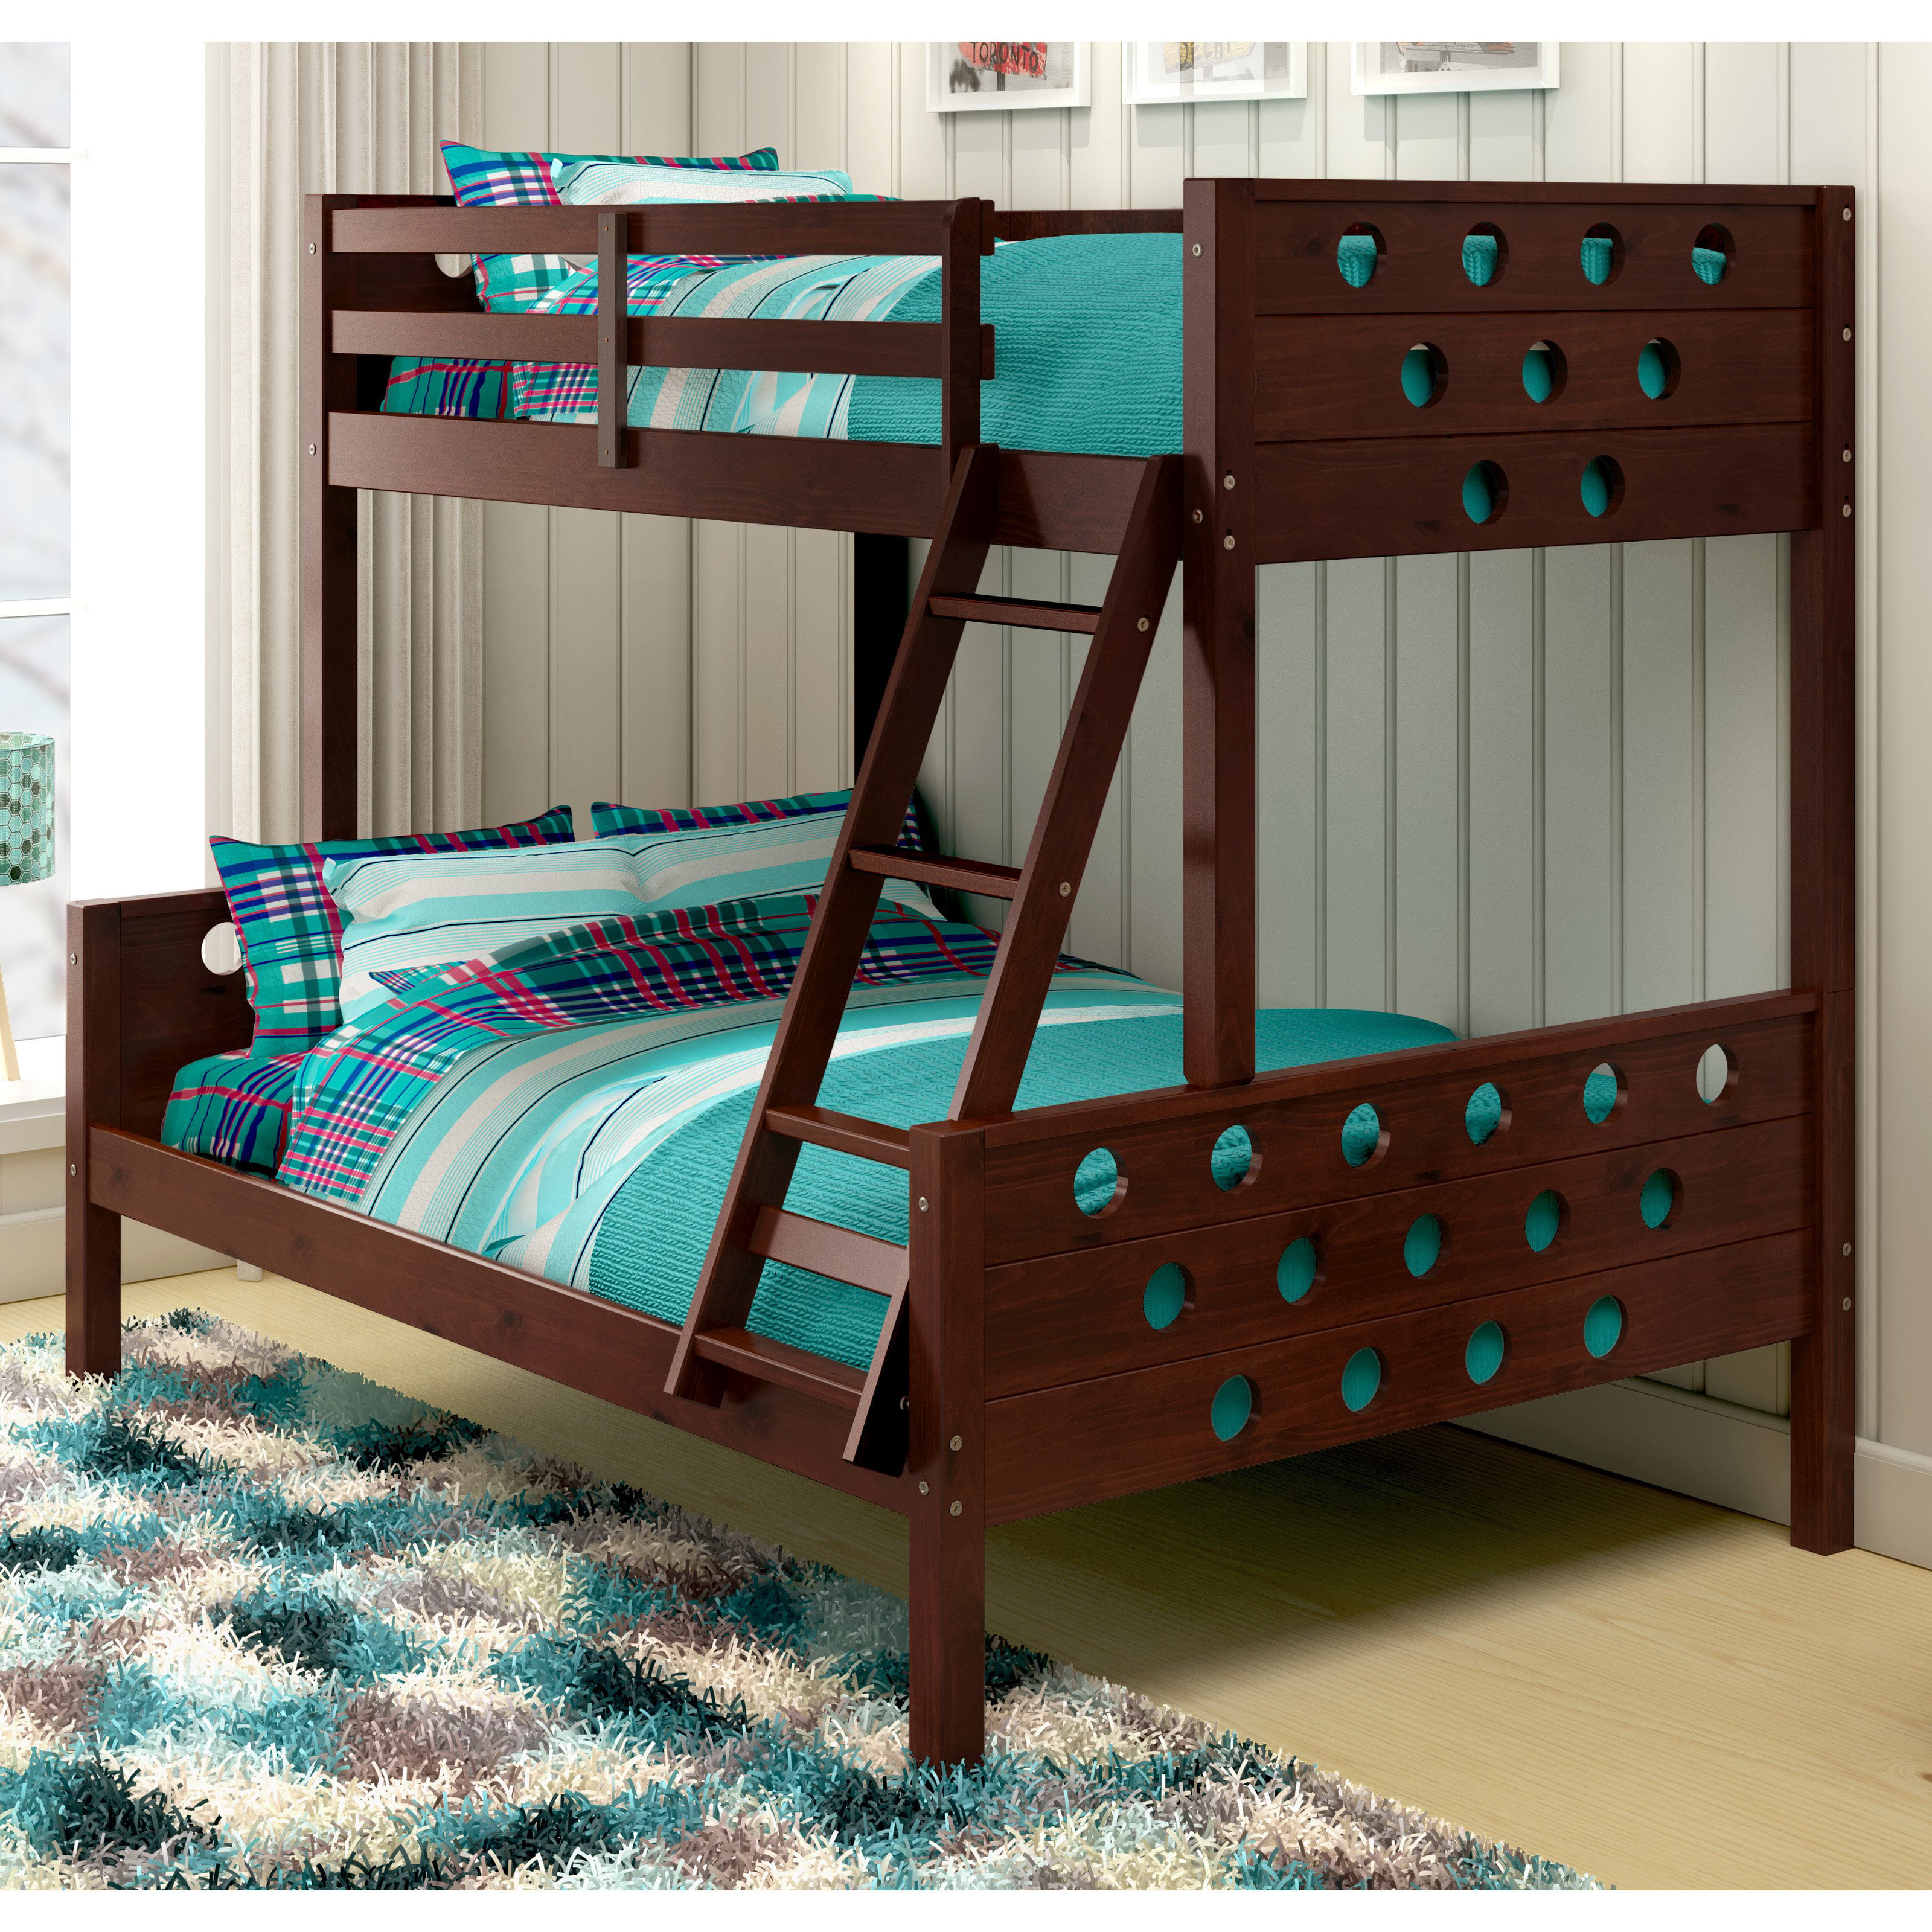 Donco Circles Twin Over Full Bunk Bed, Donco Twin Over Full Mission Bunk Bed